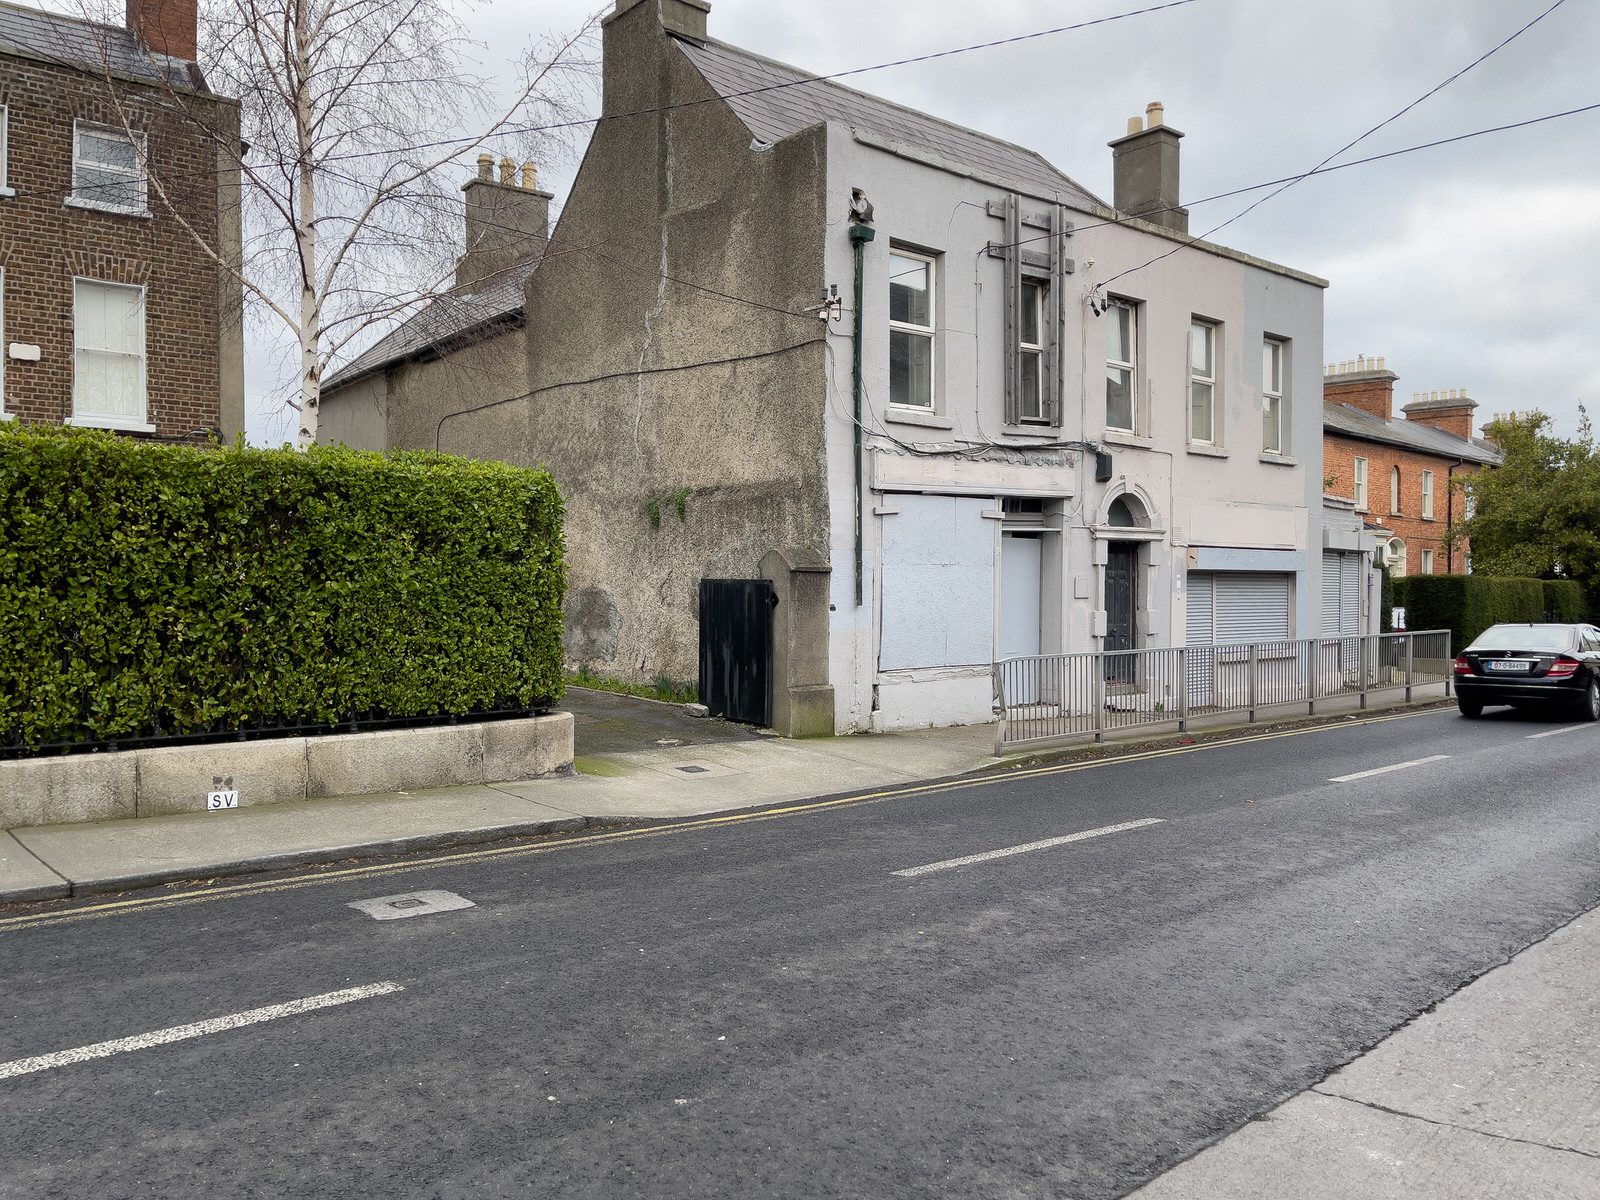 BOOTERSTOWN AVENUE 011